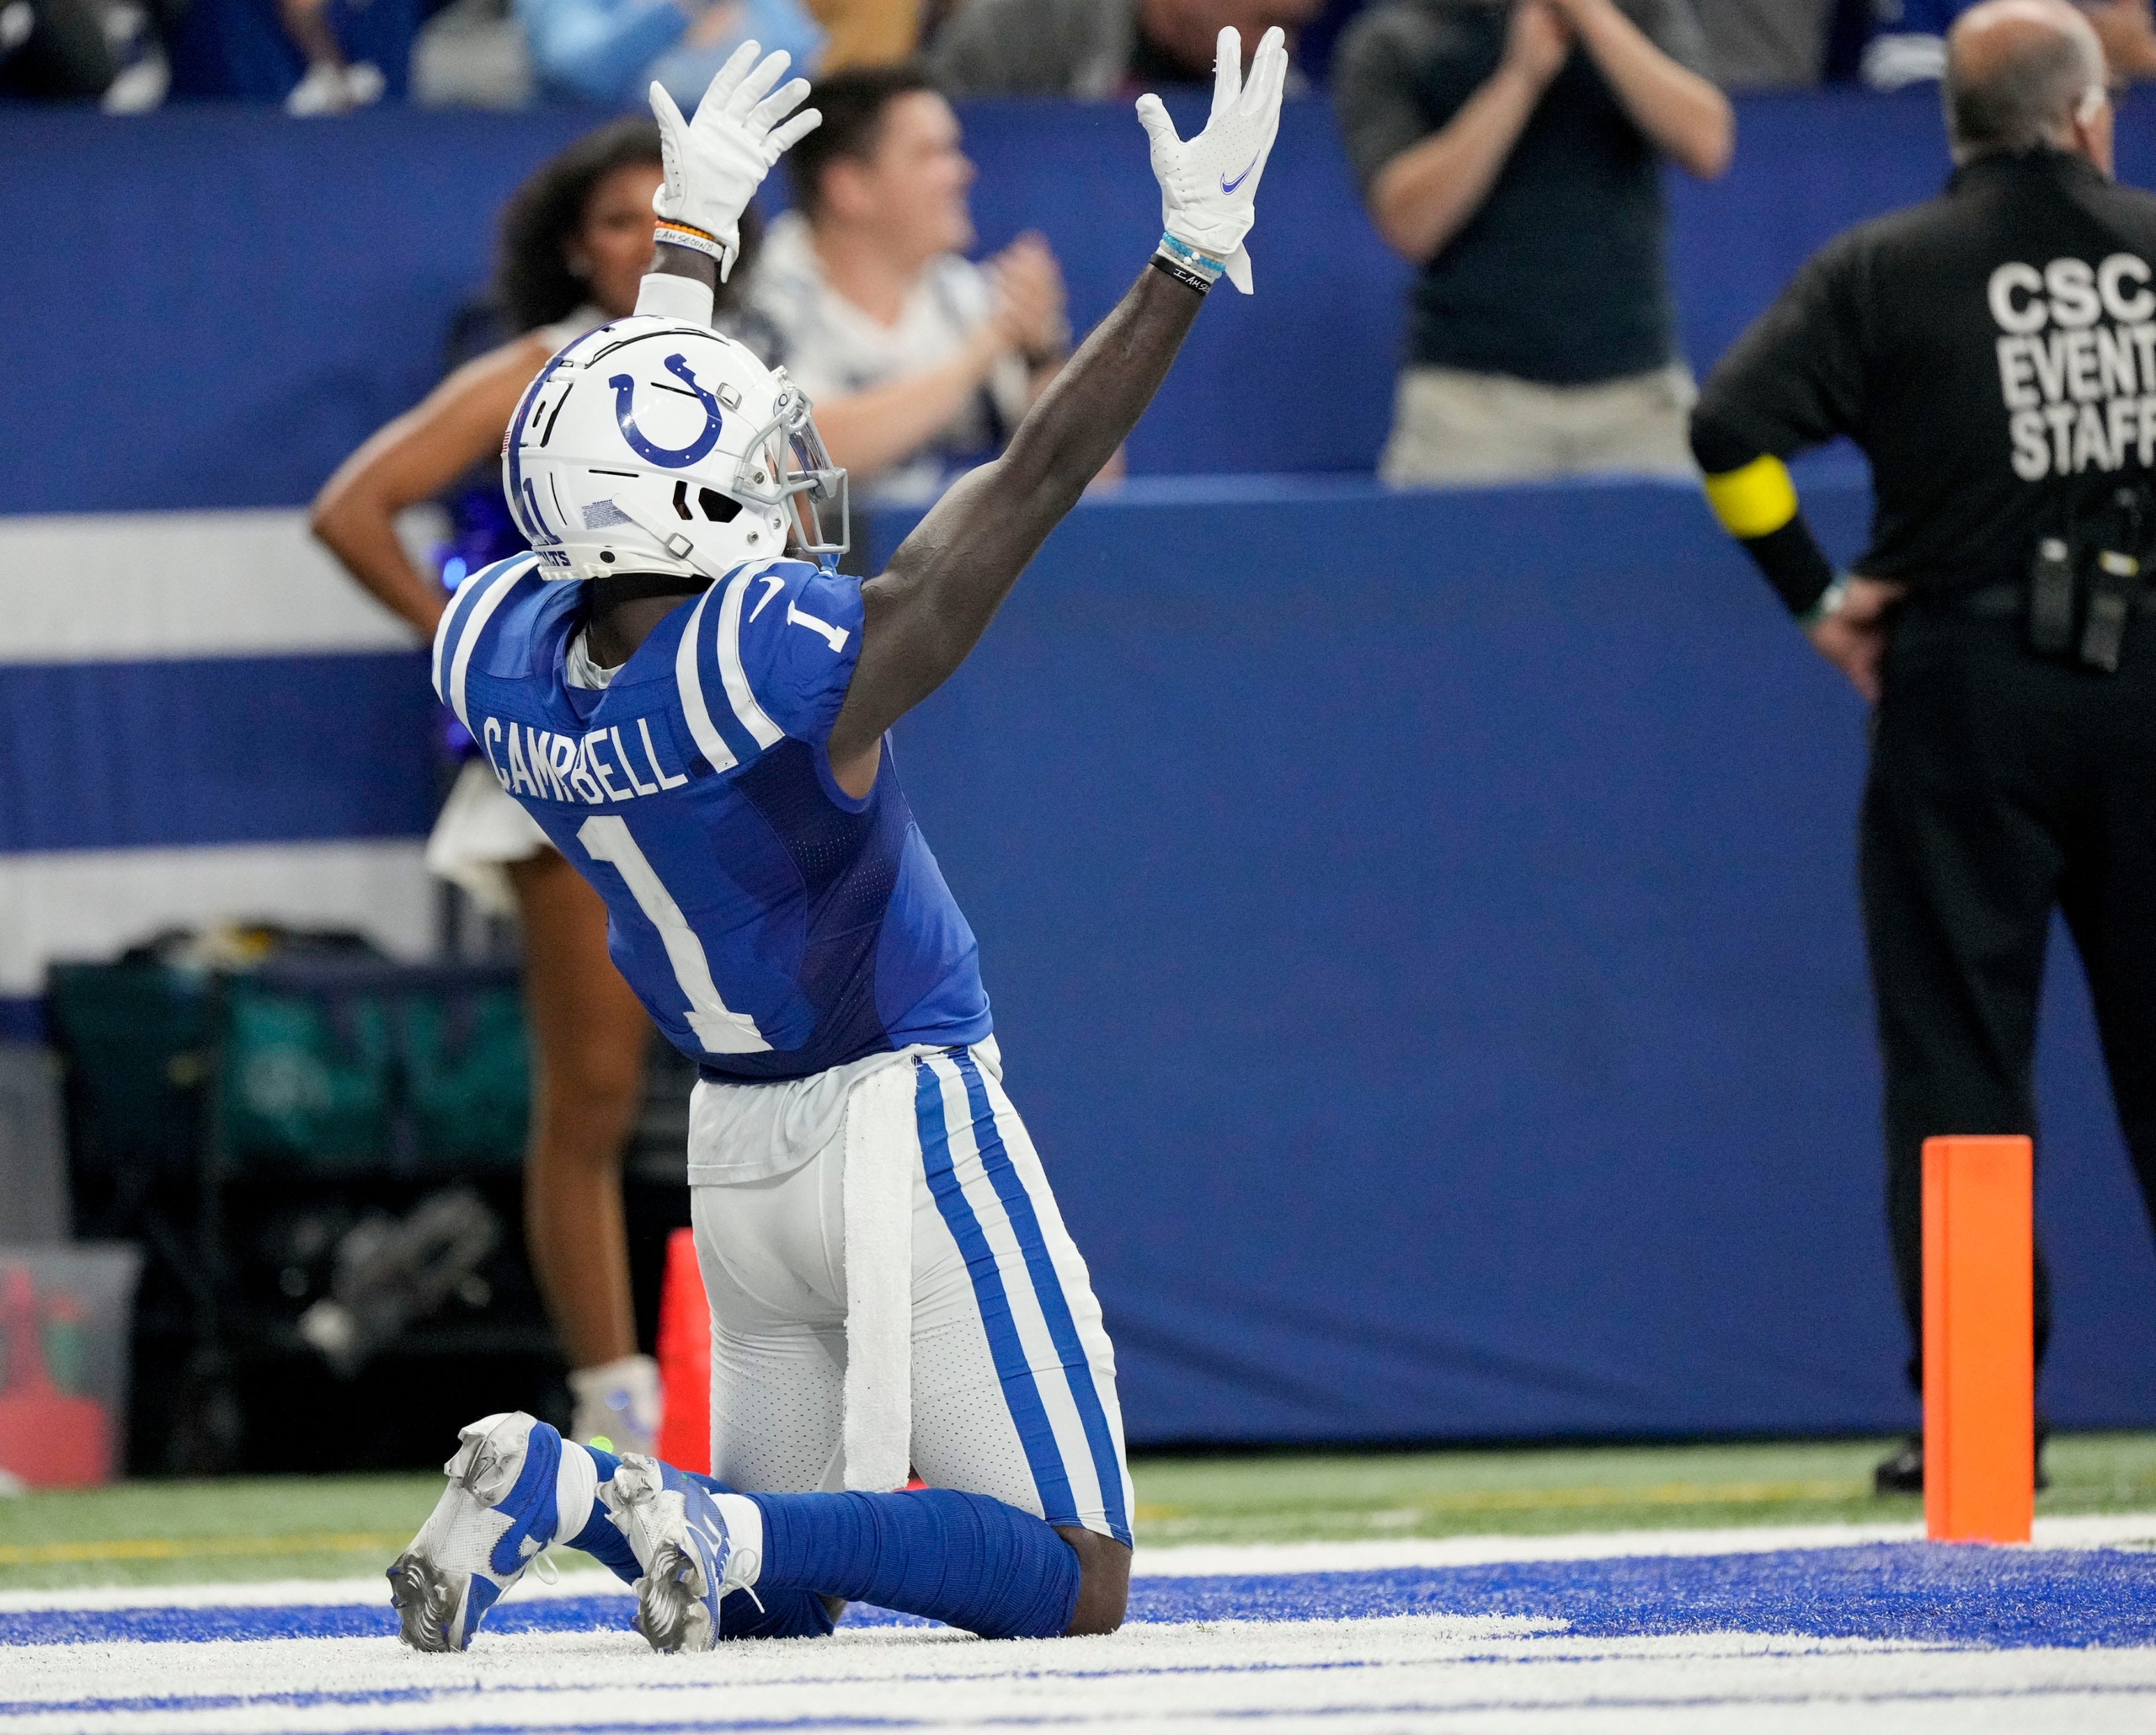 Indianapolis Colts schedule: 2023 Colts opponents, depth chart